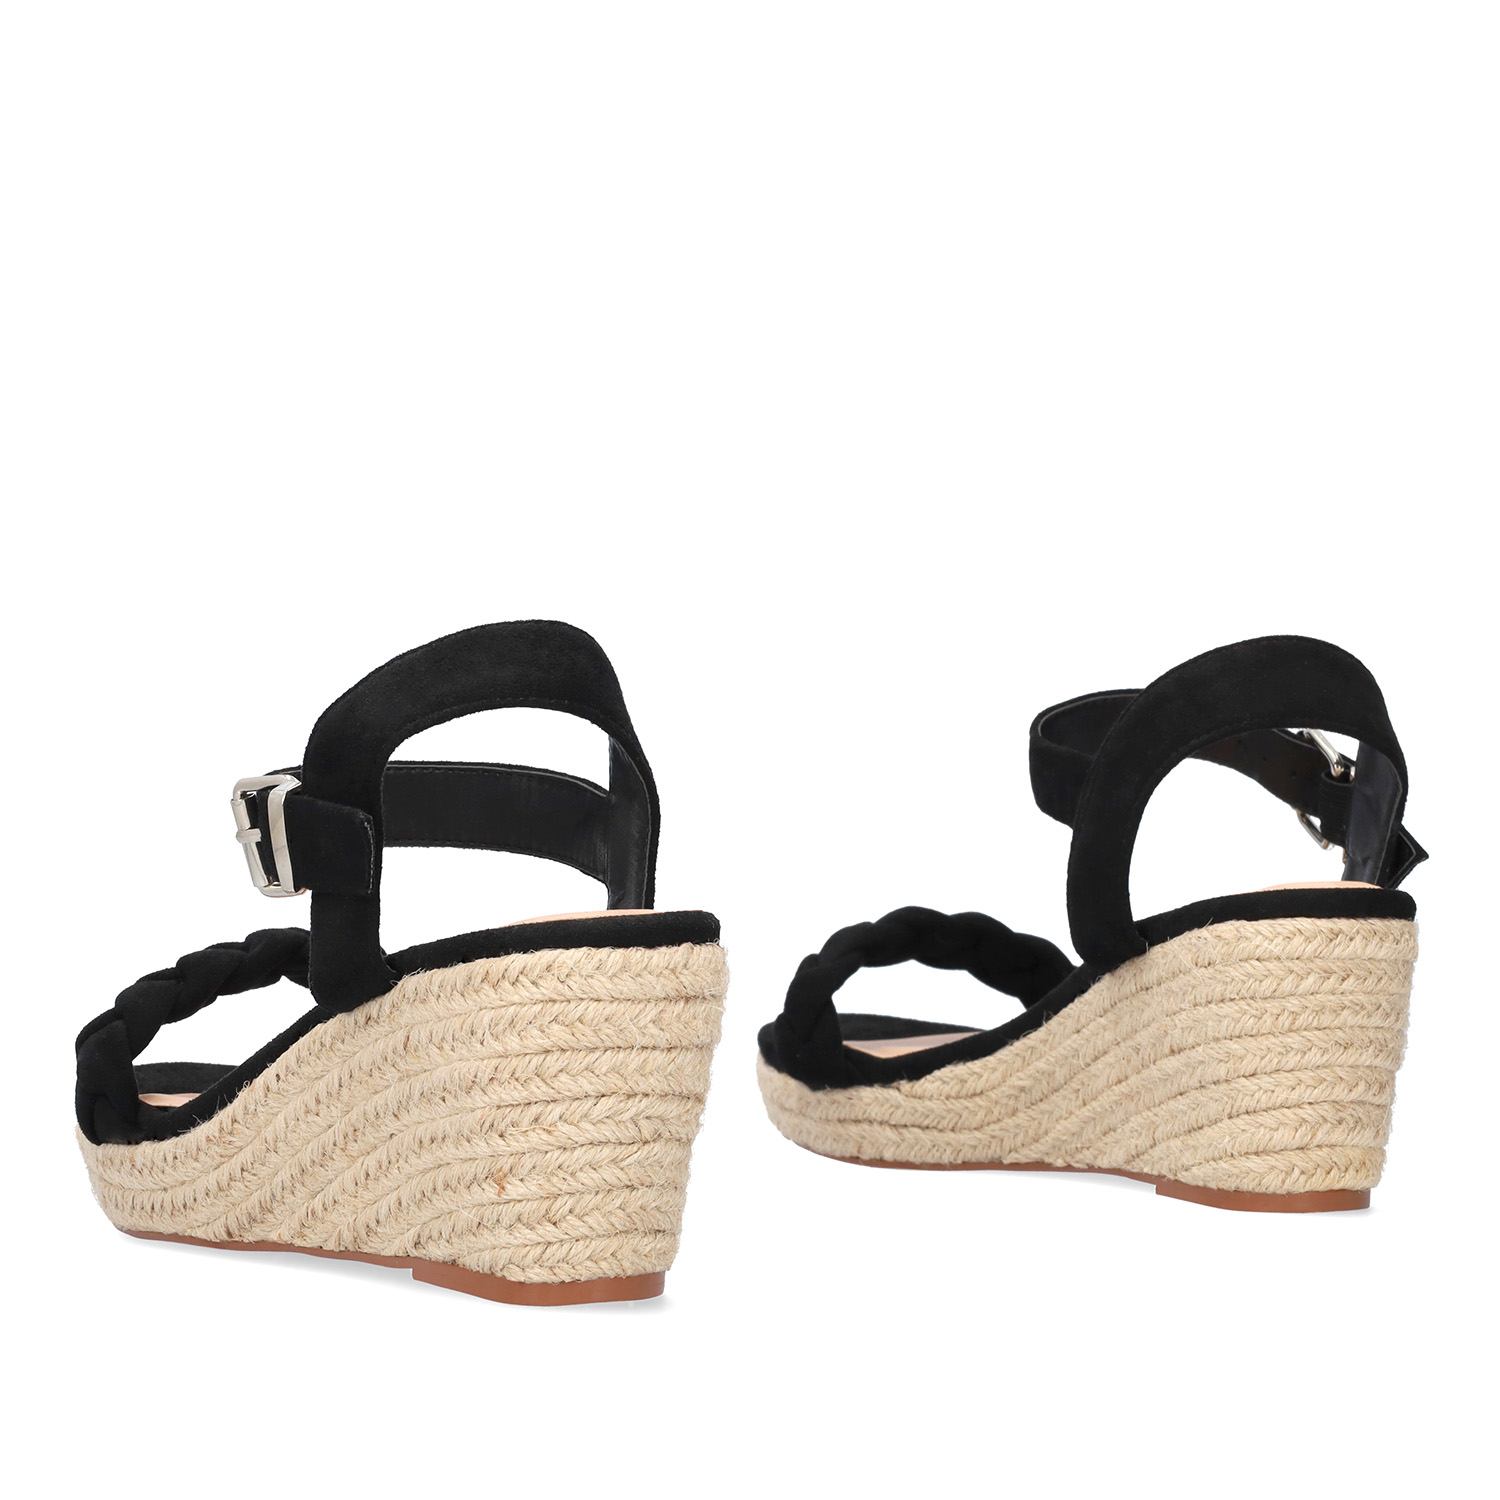 Black faux suede sandals with a jute wedge 